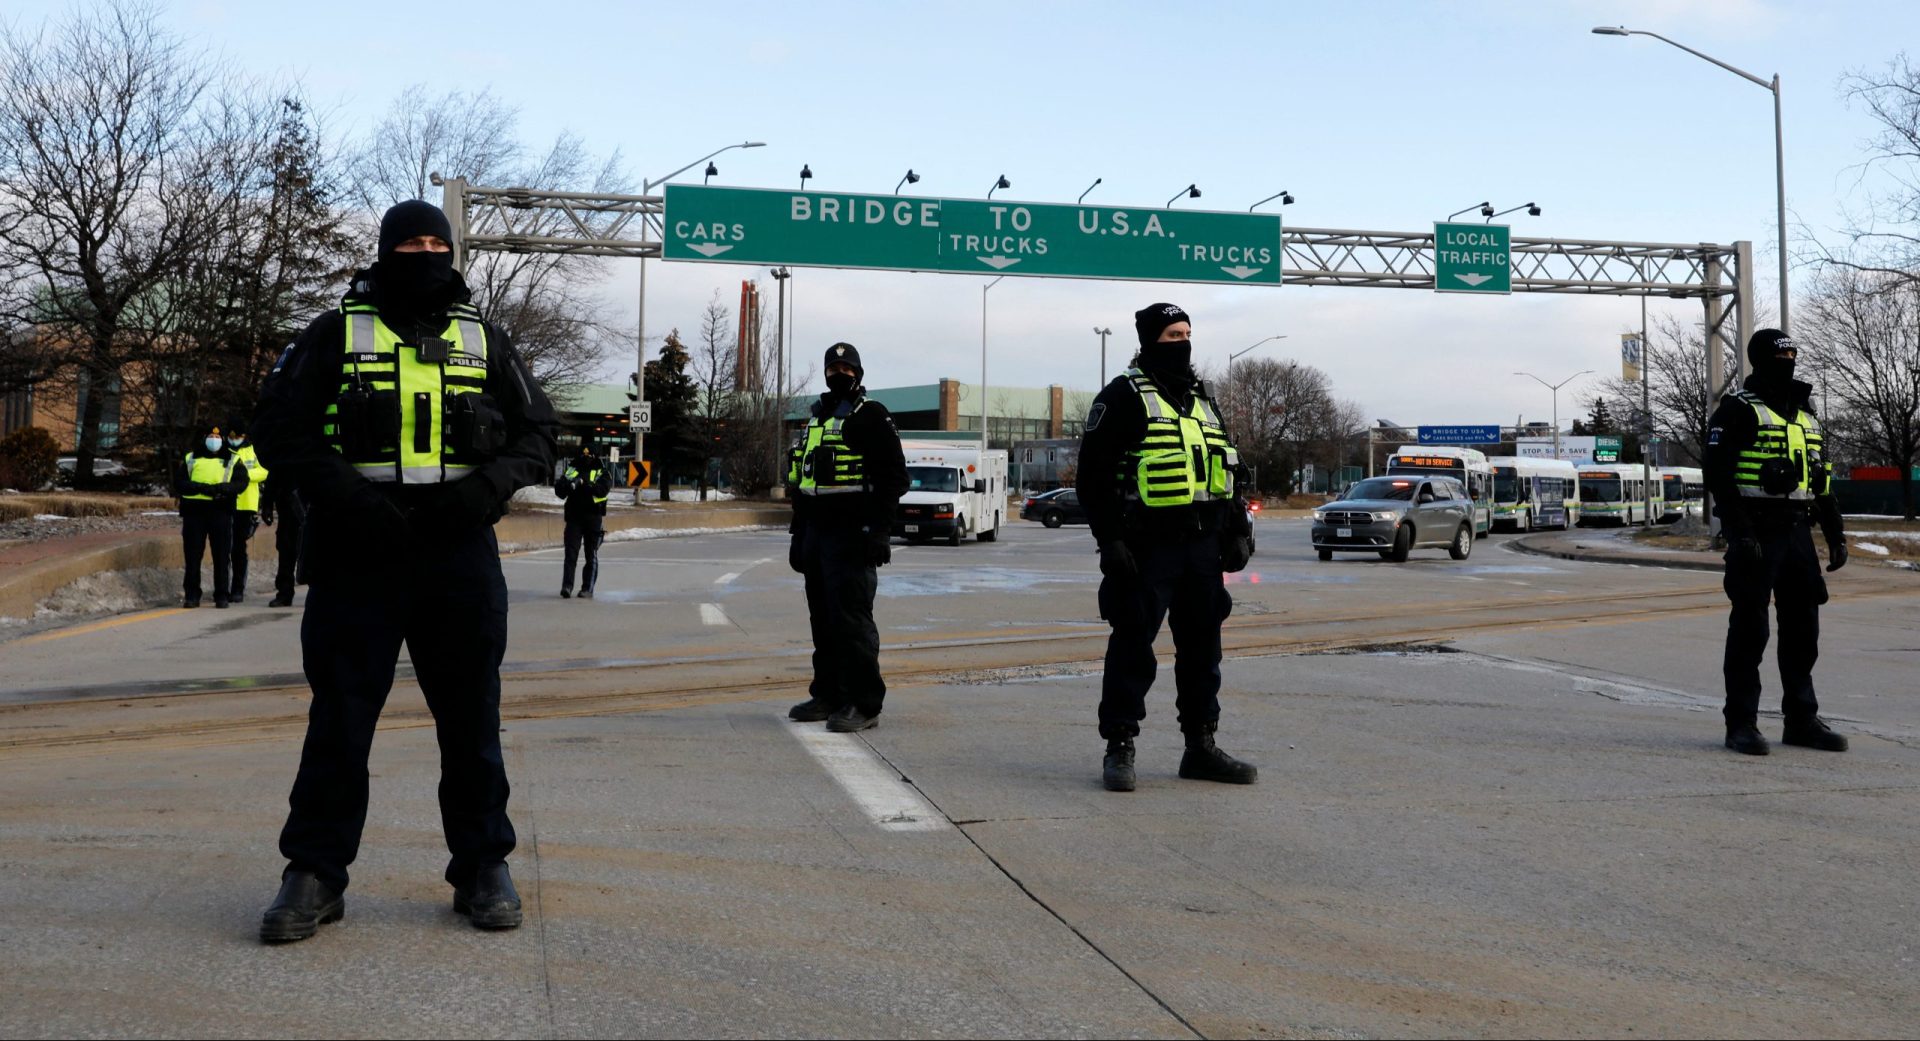 Police from London, Ontario, keep protestors against Covid-19 vaccine mandates from the entrance to the Ambassador Bridge in Windsor, Ontario, Canada, on February 12, 2022. - Police in Canada were positioning Saturday to clear the bridge on the US border, snarled for days by truckers protesting against vaccination rules, an AFP journalist observed. 